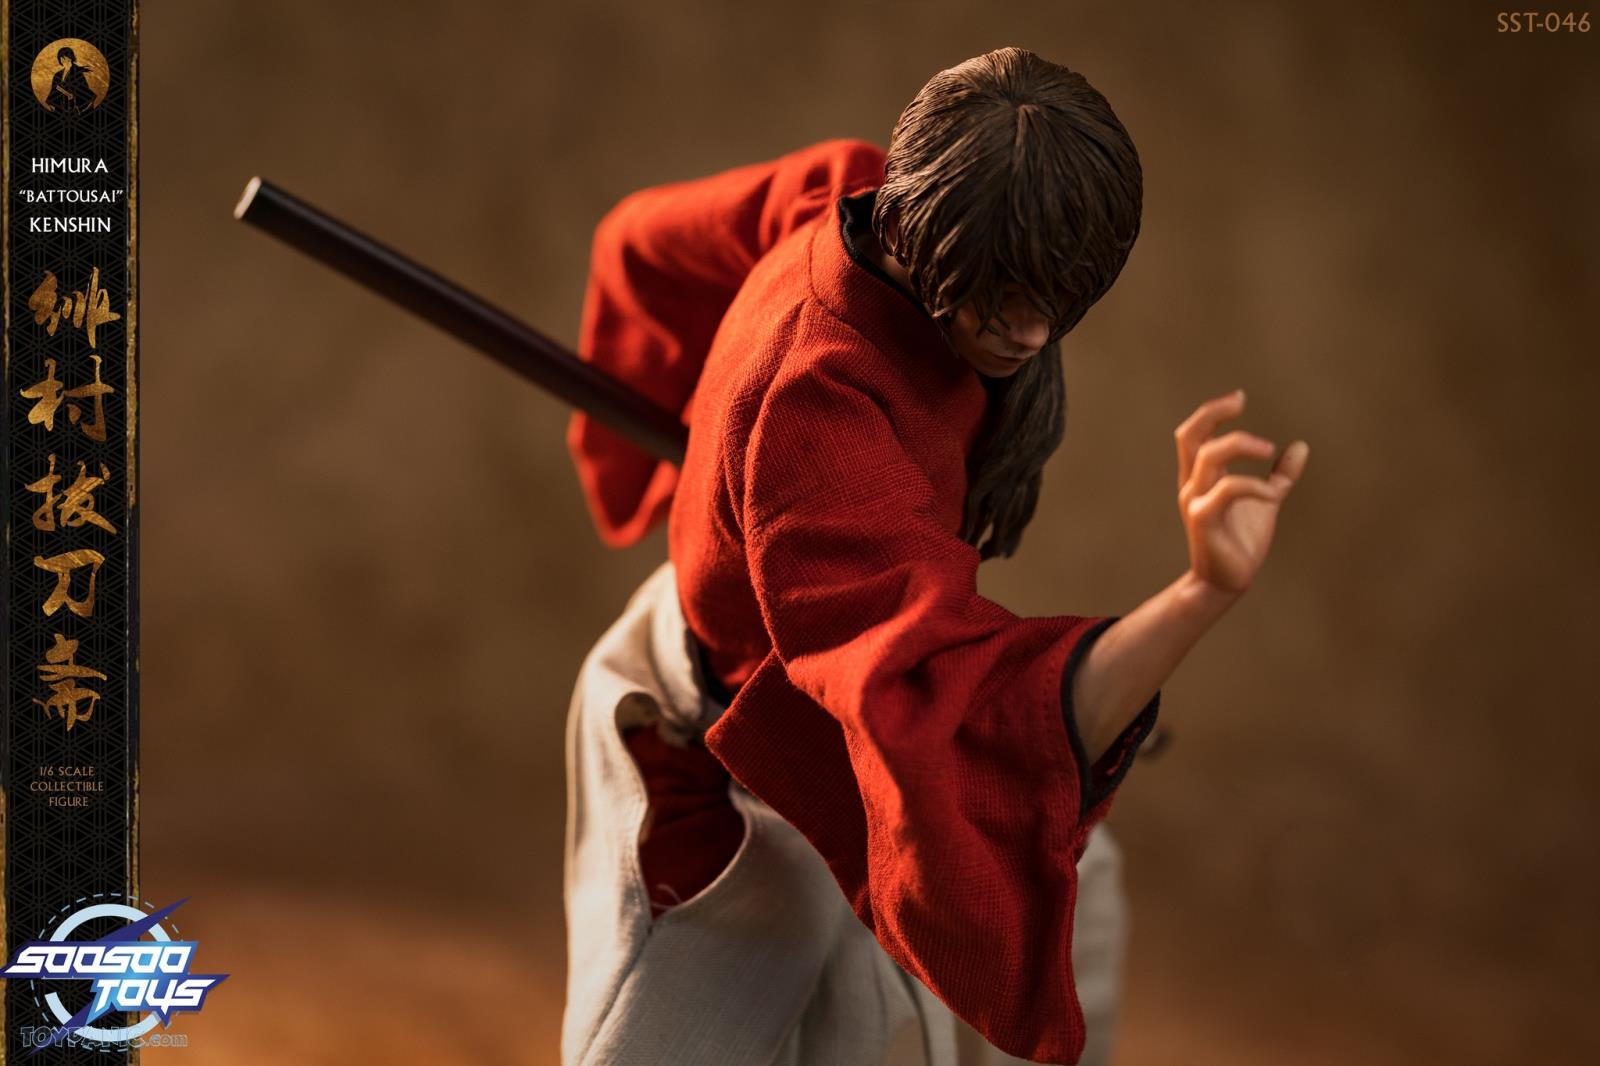 himura - NEW PRODUCT: 1/6 scale Rurouni Kenshin Collectible Figure from SooSooToys 712202251231PM_2000183